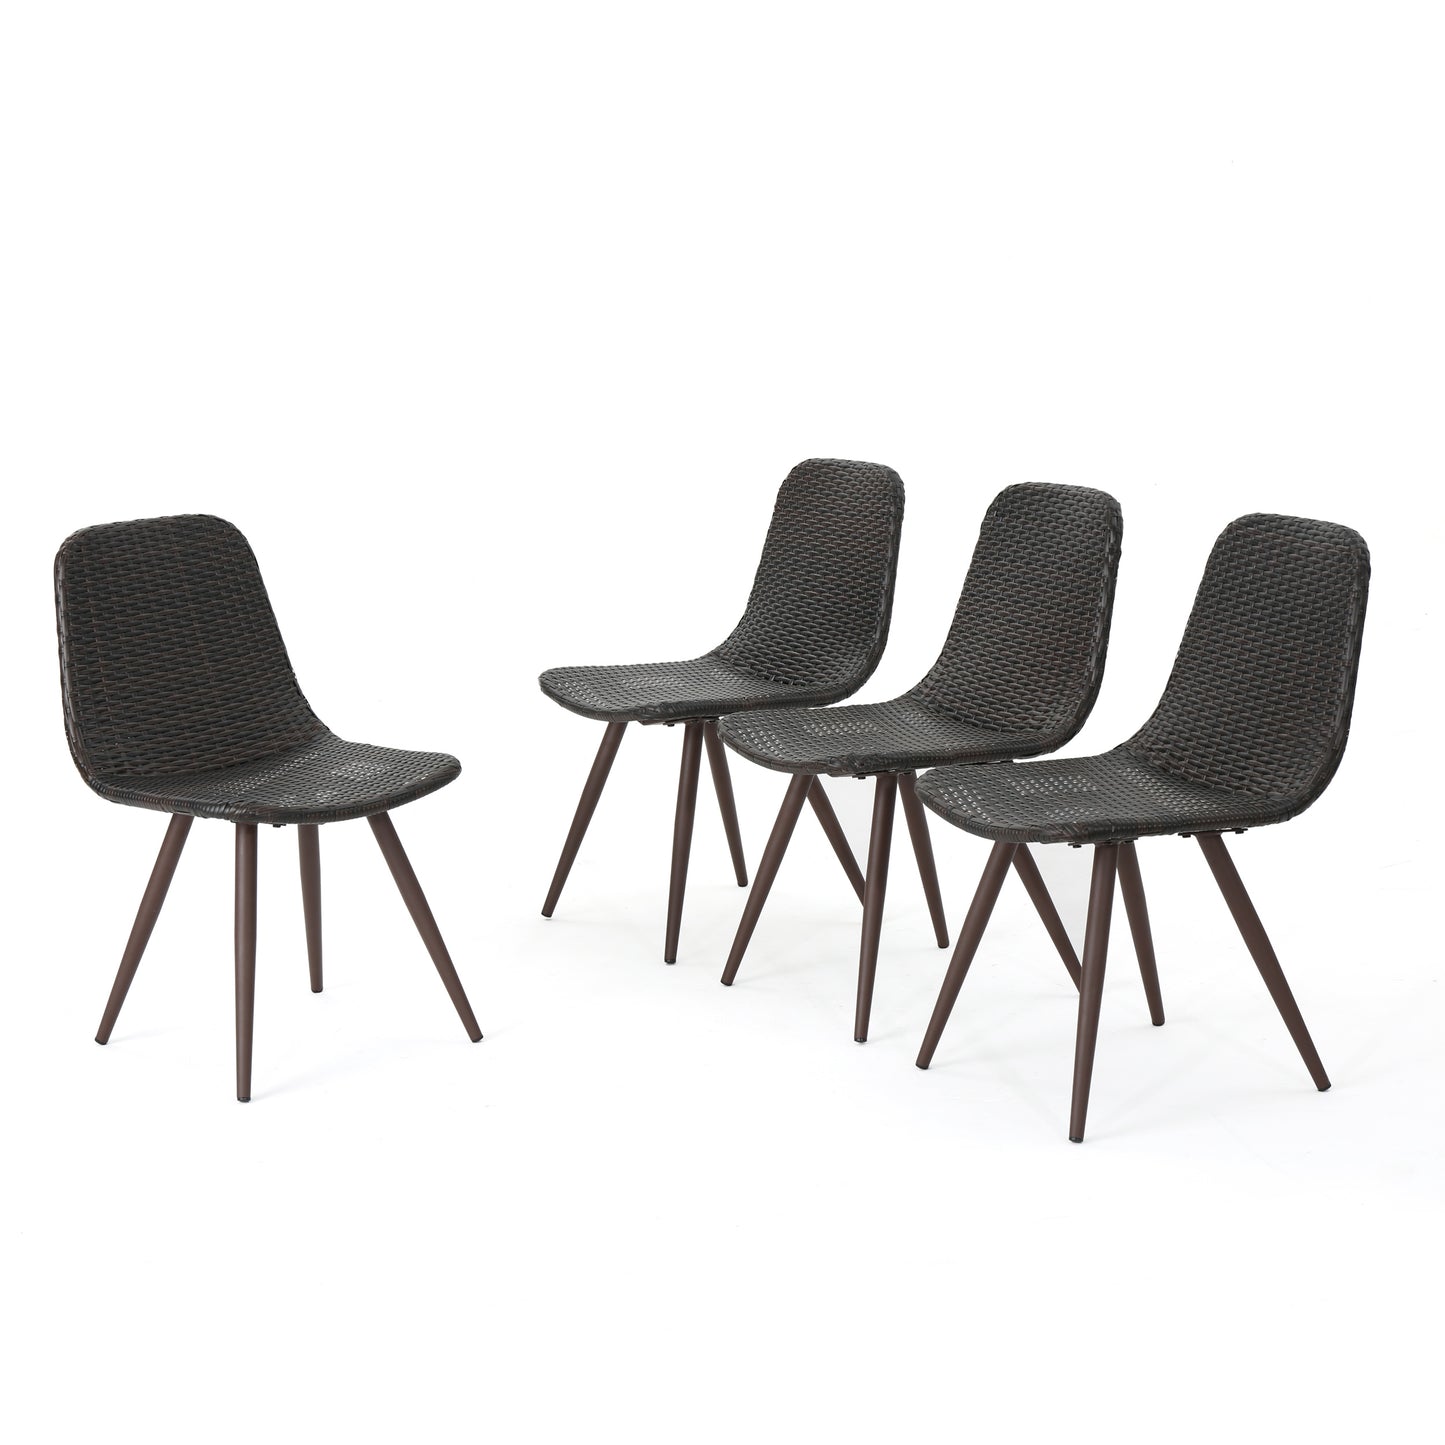 Gilda Outdoor Multibrown Wicker Dining Chairs with Dark Brown Powder Coated Legs